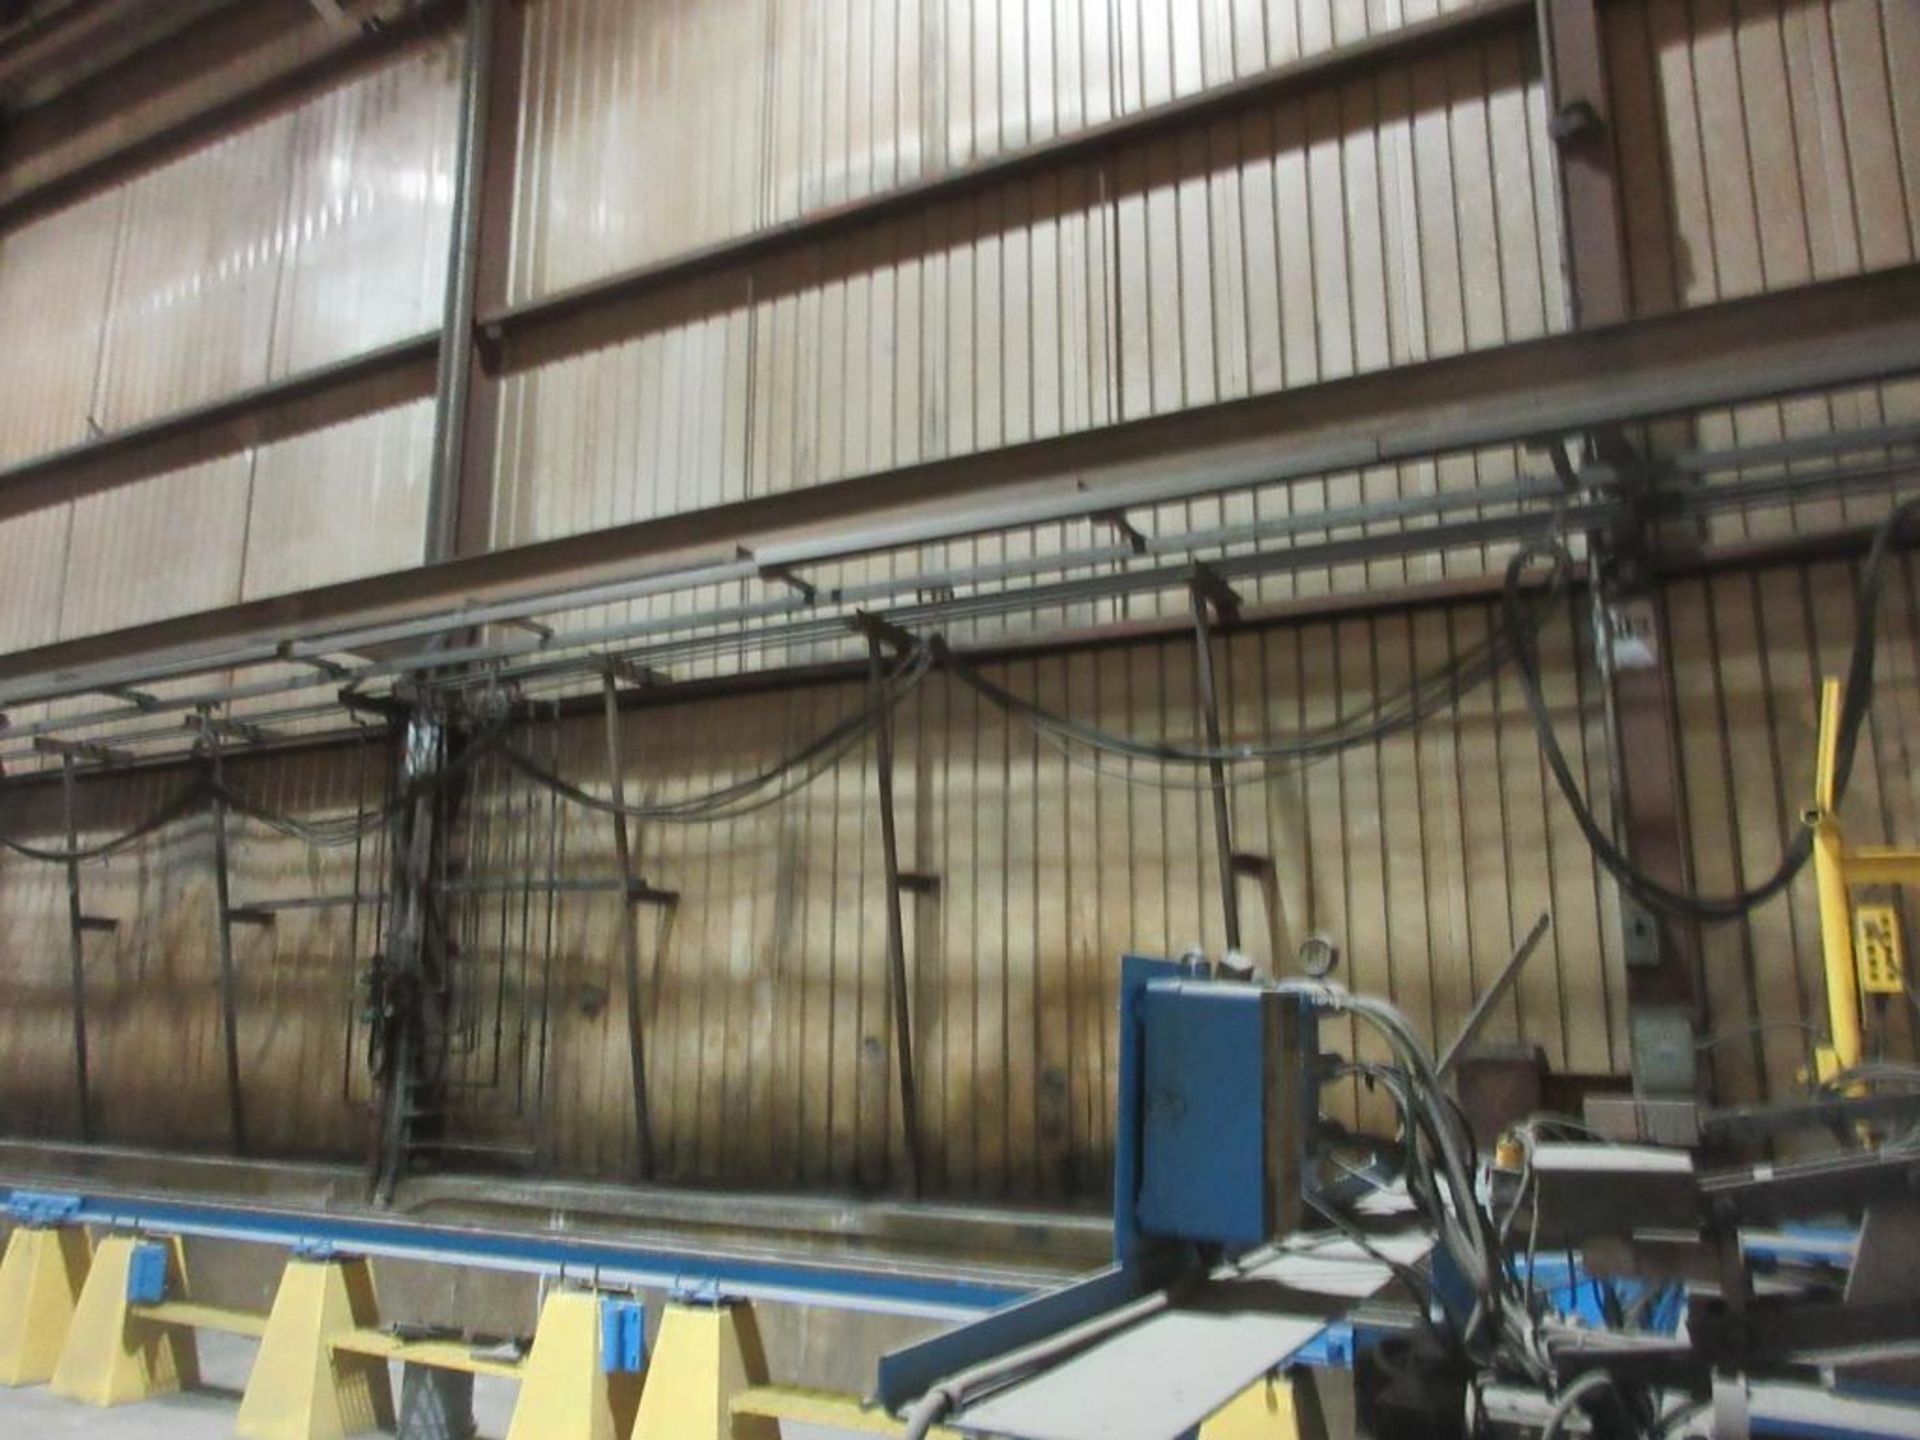 PANDJRIS CUTTING TABLE, 12'W X 66'L APPROX, WITH 3 12' BRIDGES, 3 TORCHES, TROLLIES, WALL MOUNTED WI - Image 10 of 11